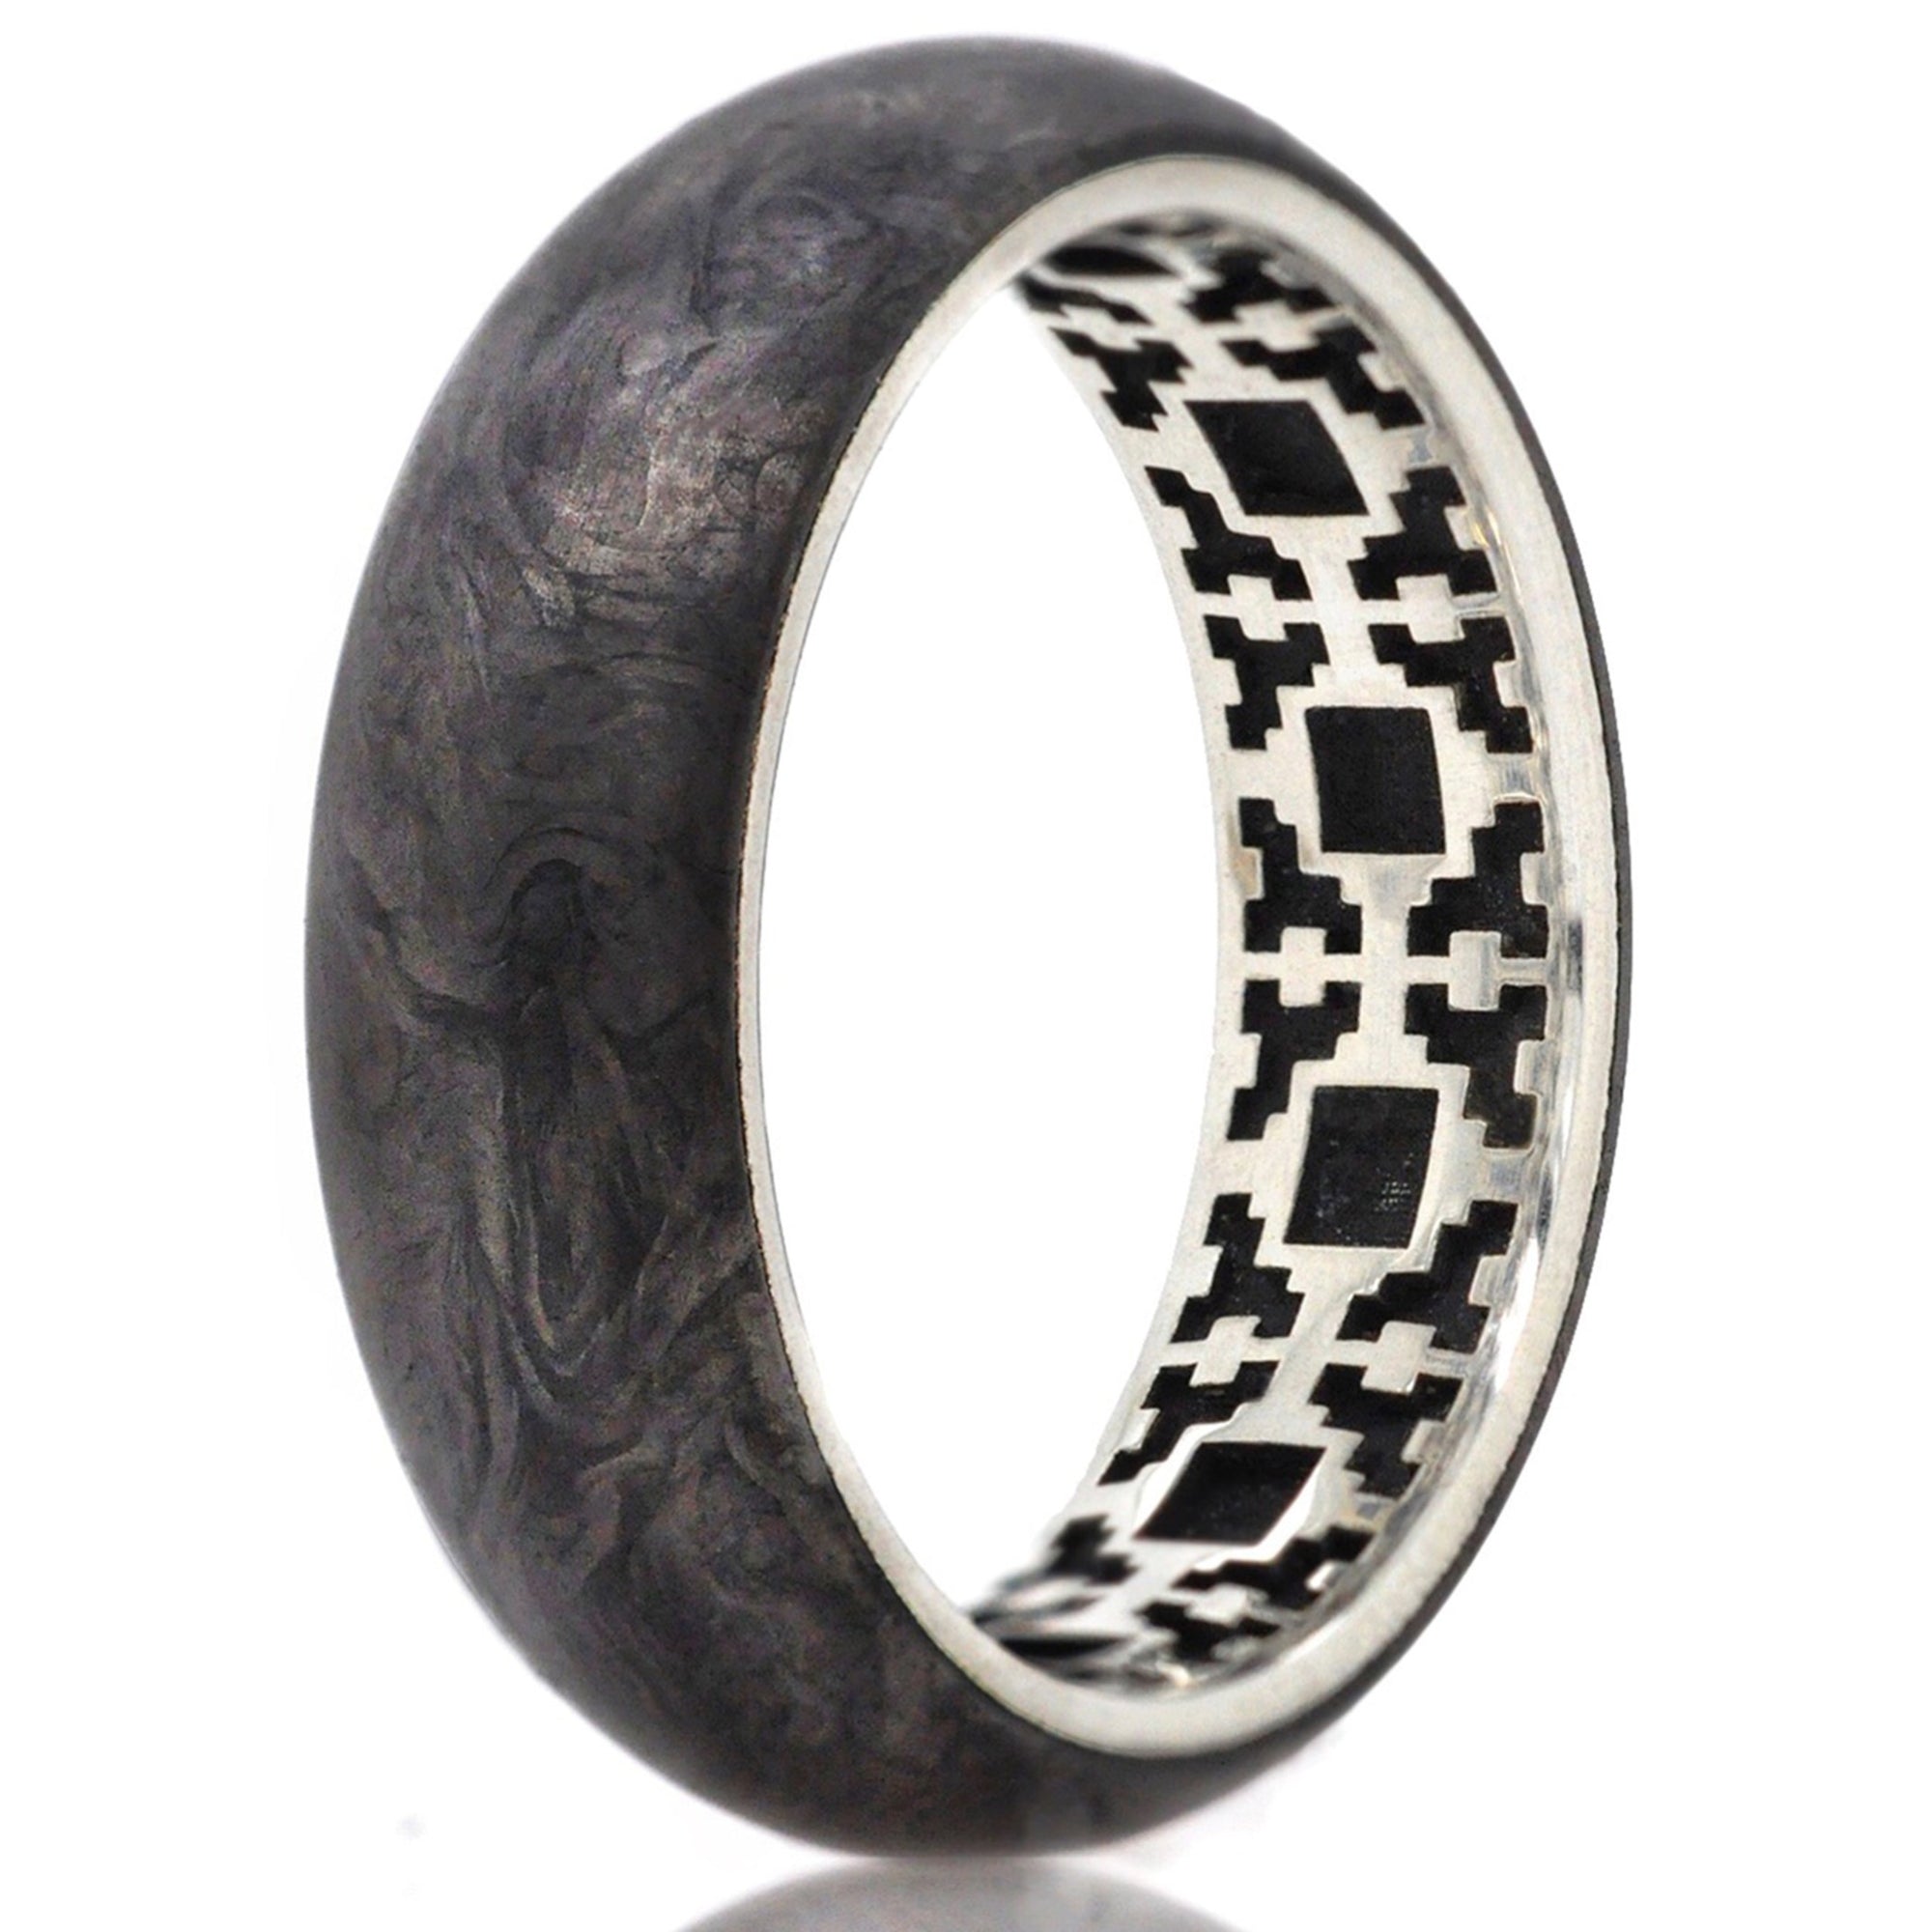 Forged Carbon Fiber Ring with Sterling Silver Interior featuring patterns of small squares. 